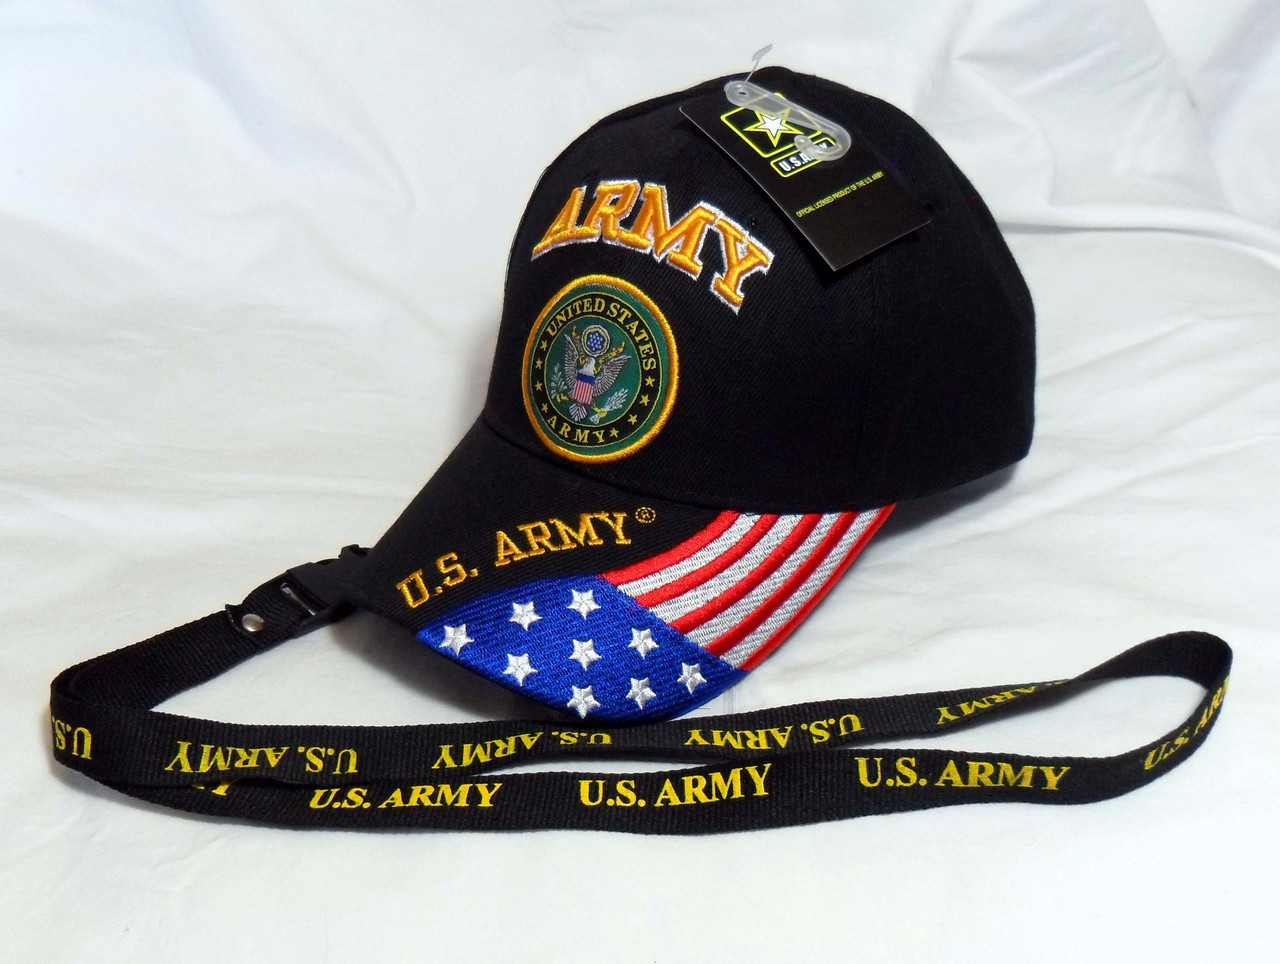 U.S Army OFFICIALLY LICENSED Embroidered With Seal /& Flag Baseball Cap Hat